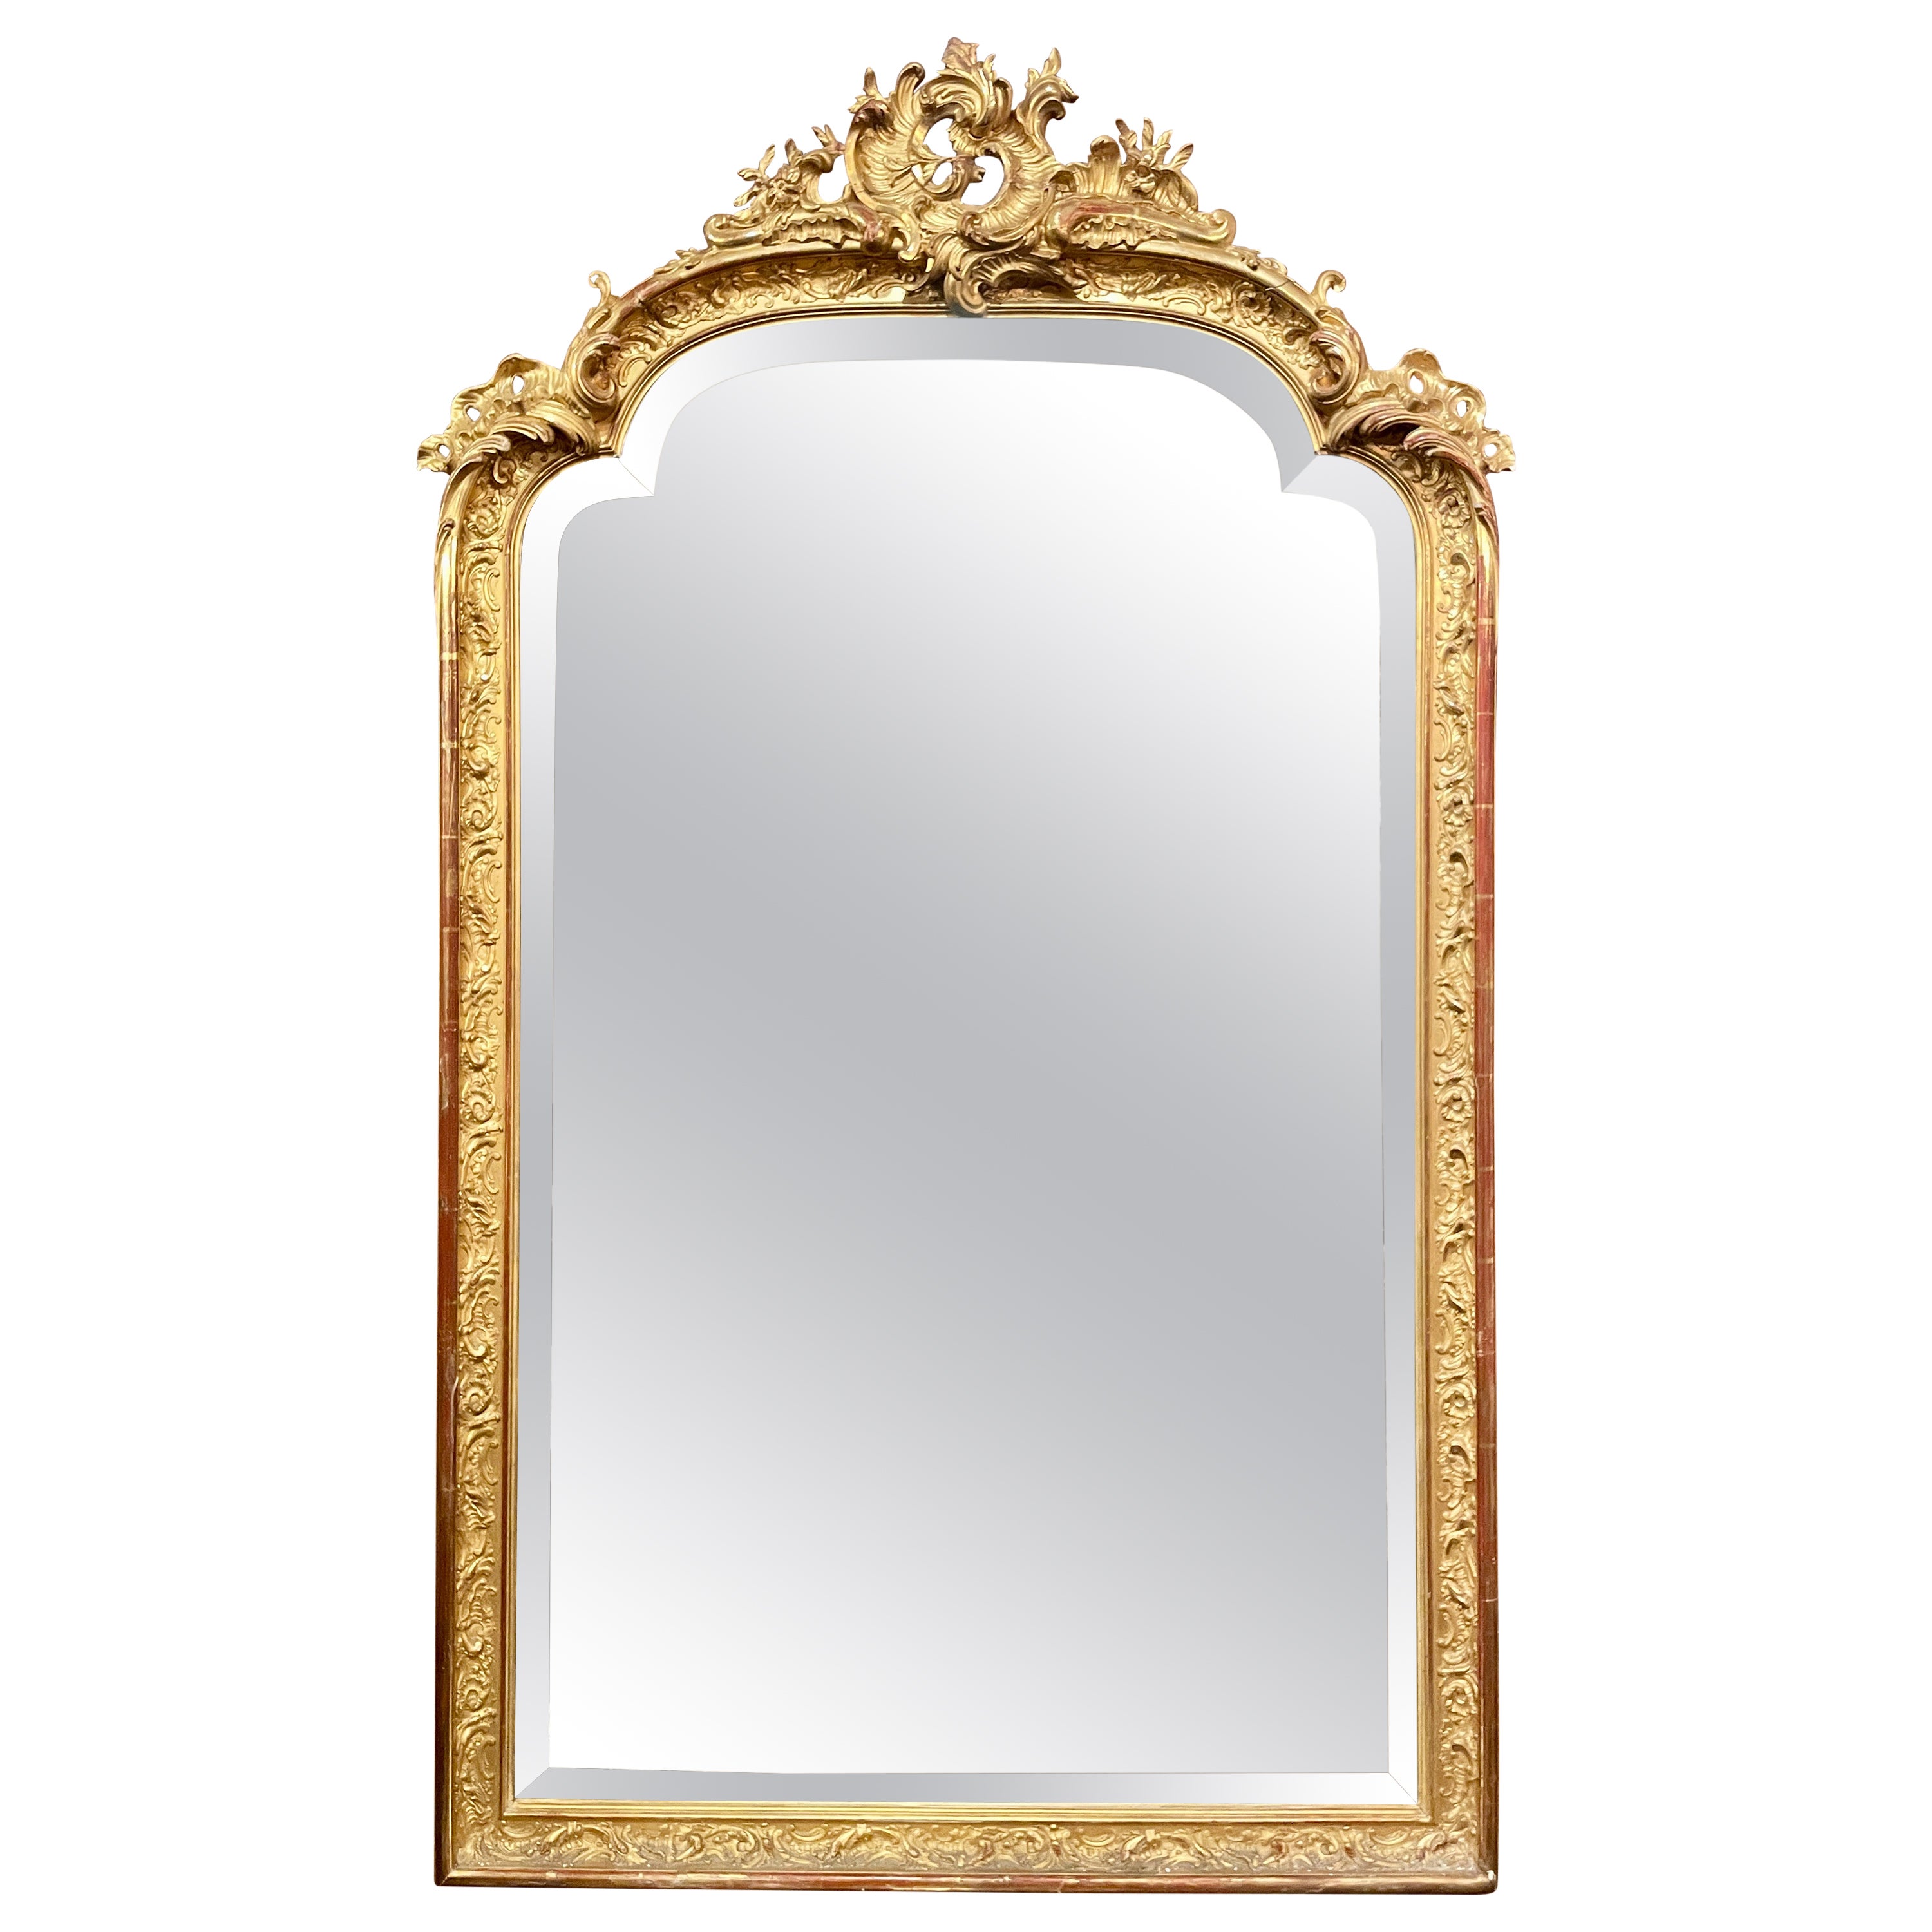 Antique French Napoleon III Gold Leaf Mirror with Beveling, Circa 1875-1885 For Sale